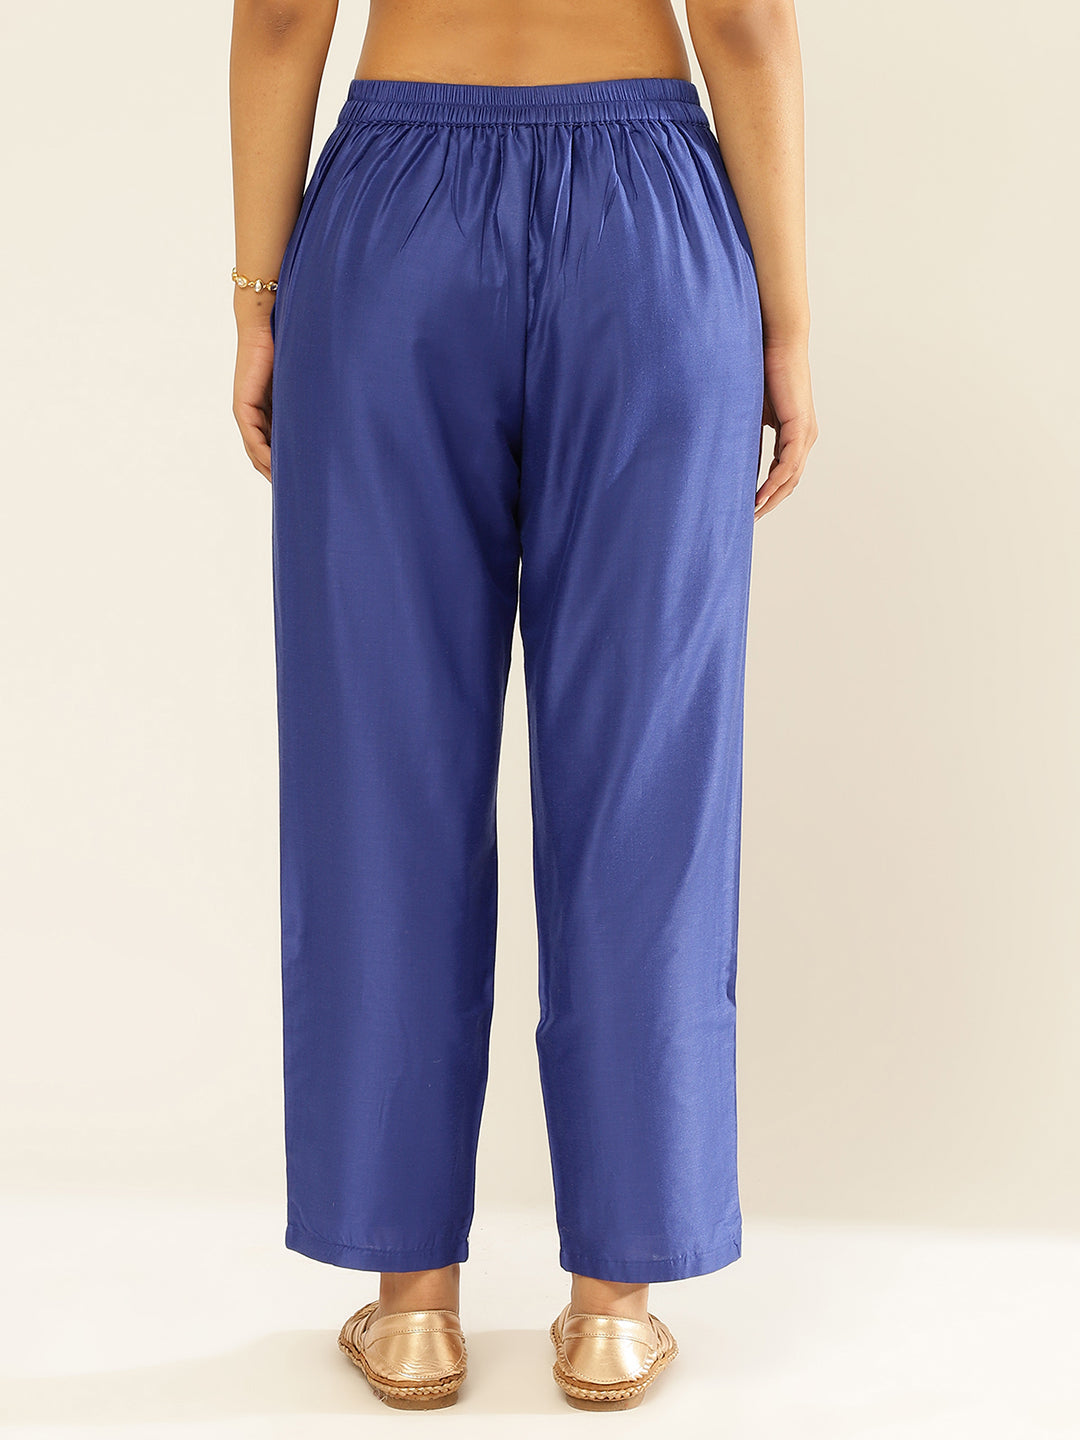 Buy Regular Fit Cotton Imperial Blue Track pants for Women online